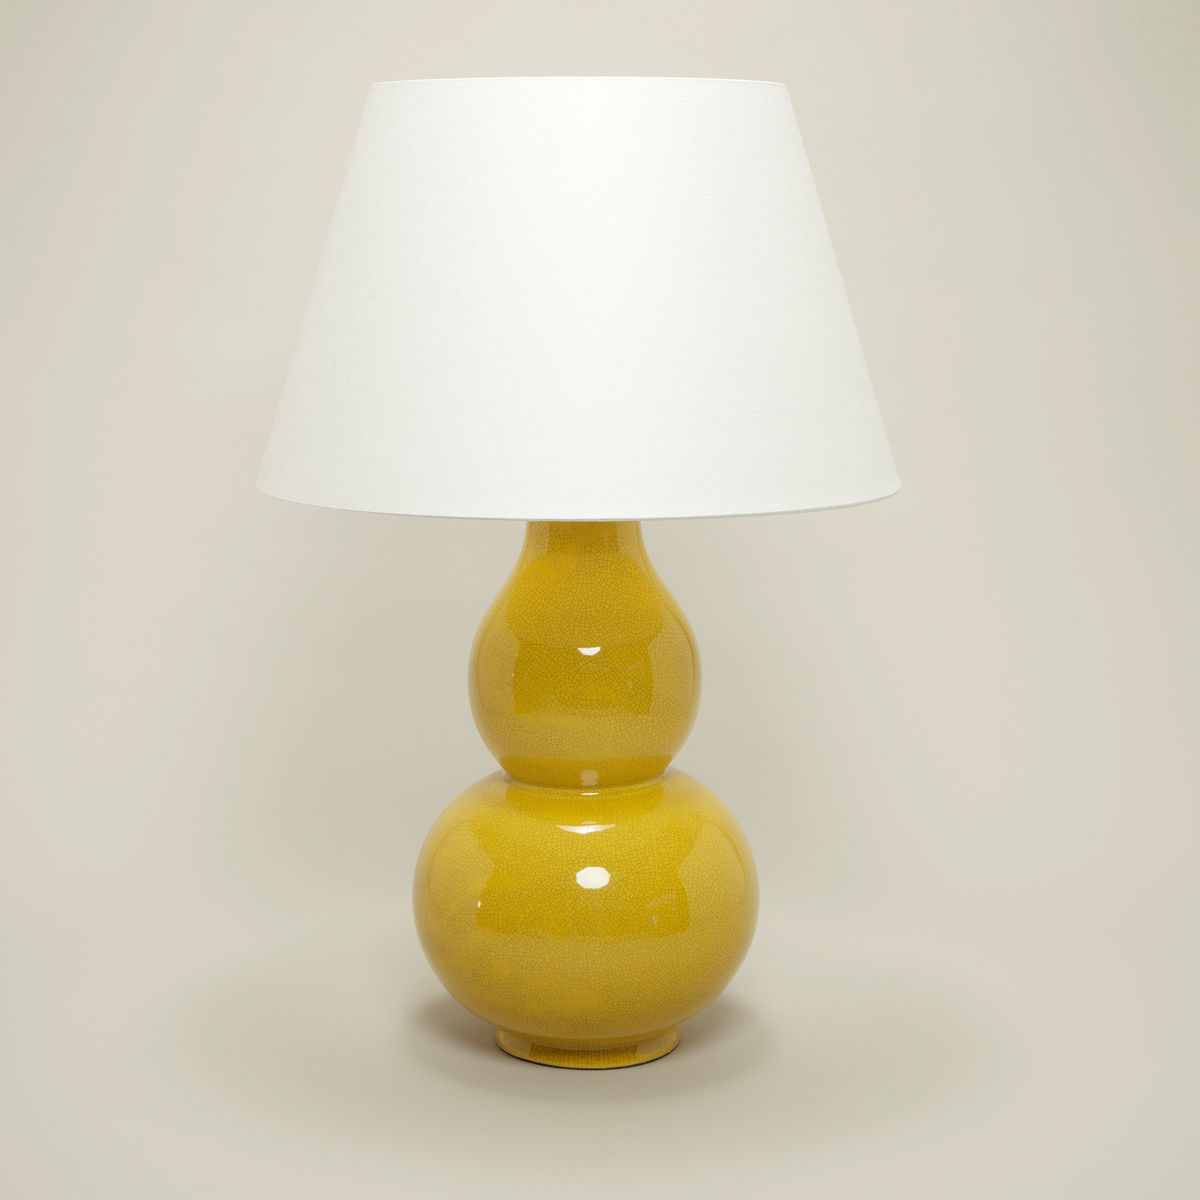 Gourd Shaped Vase Table Lamp in Crackled Mustard Yellow with Linen Laminated Lampshade